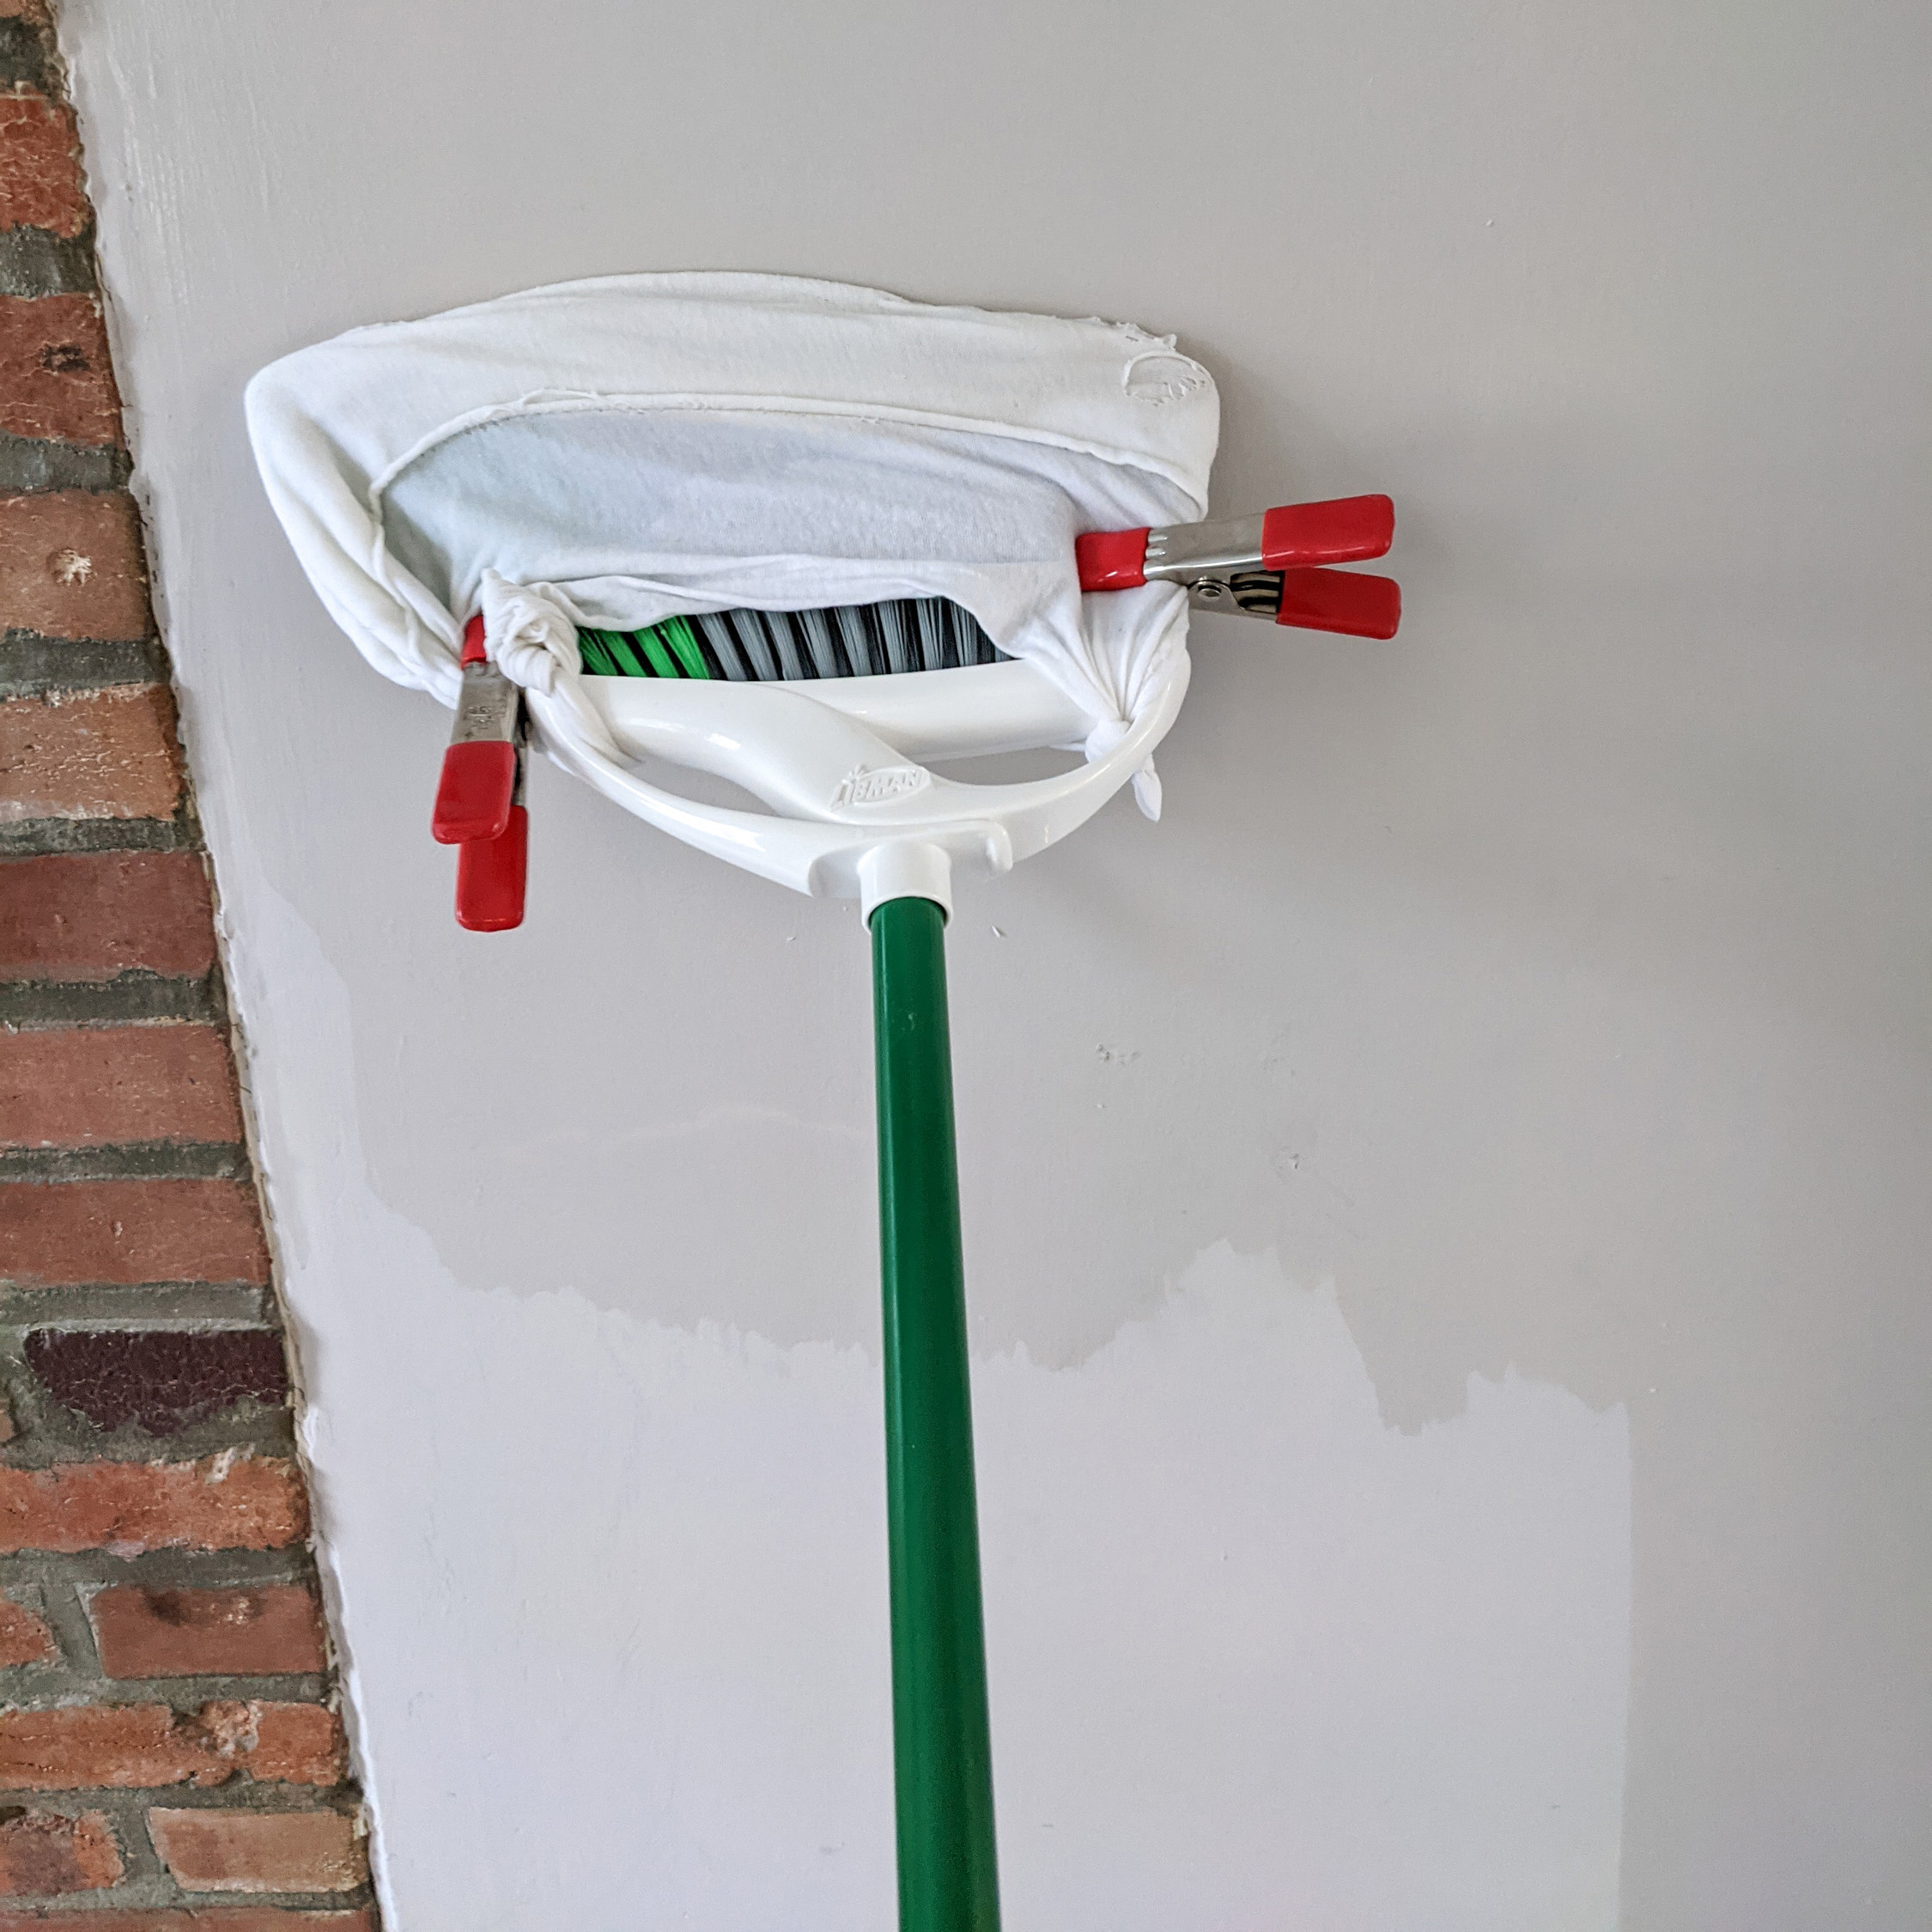 A wall being cleaned with a modified broom.